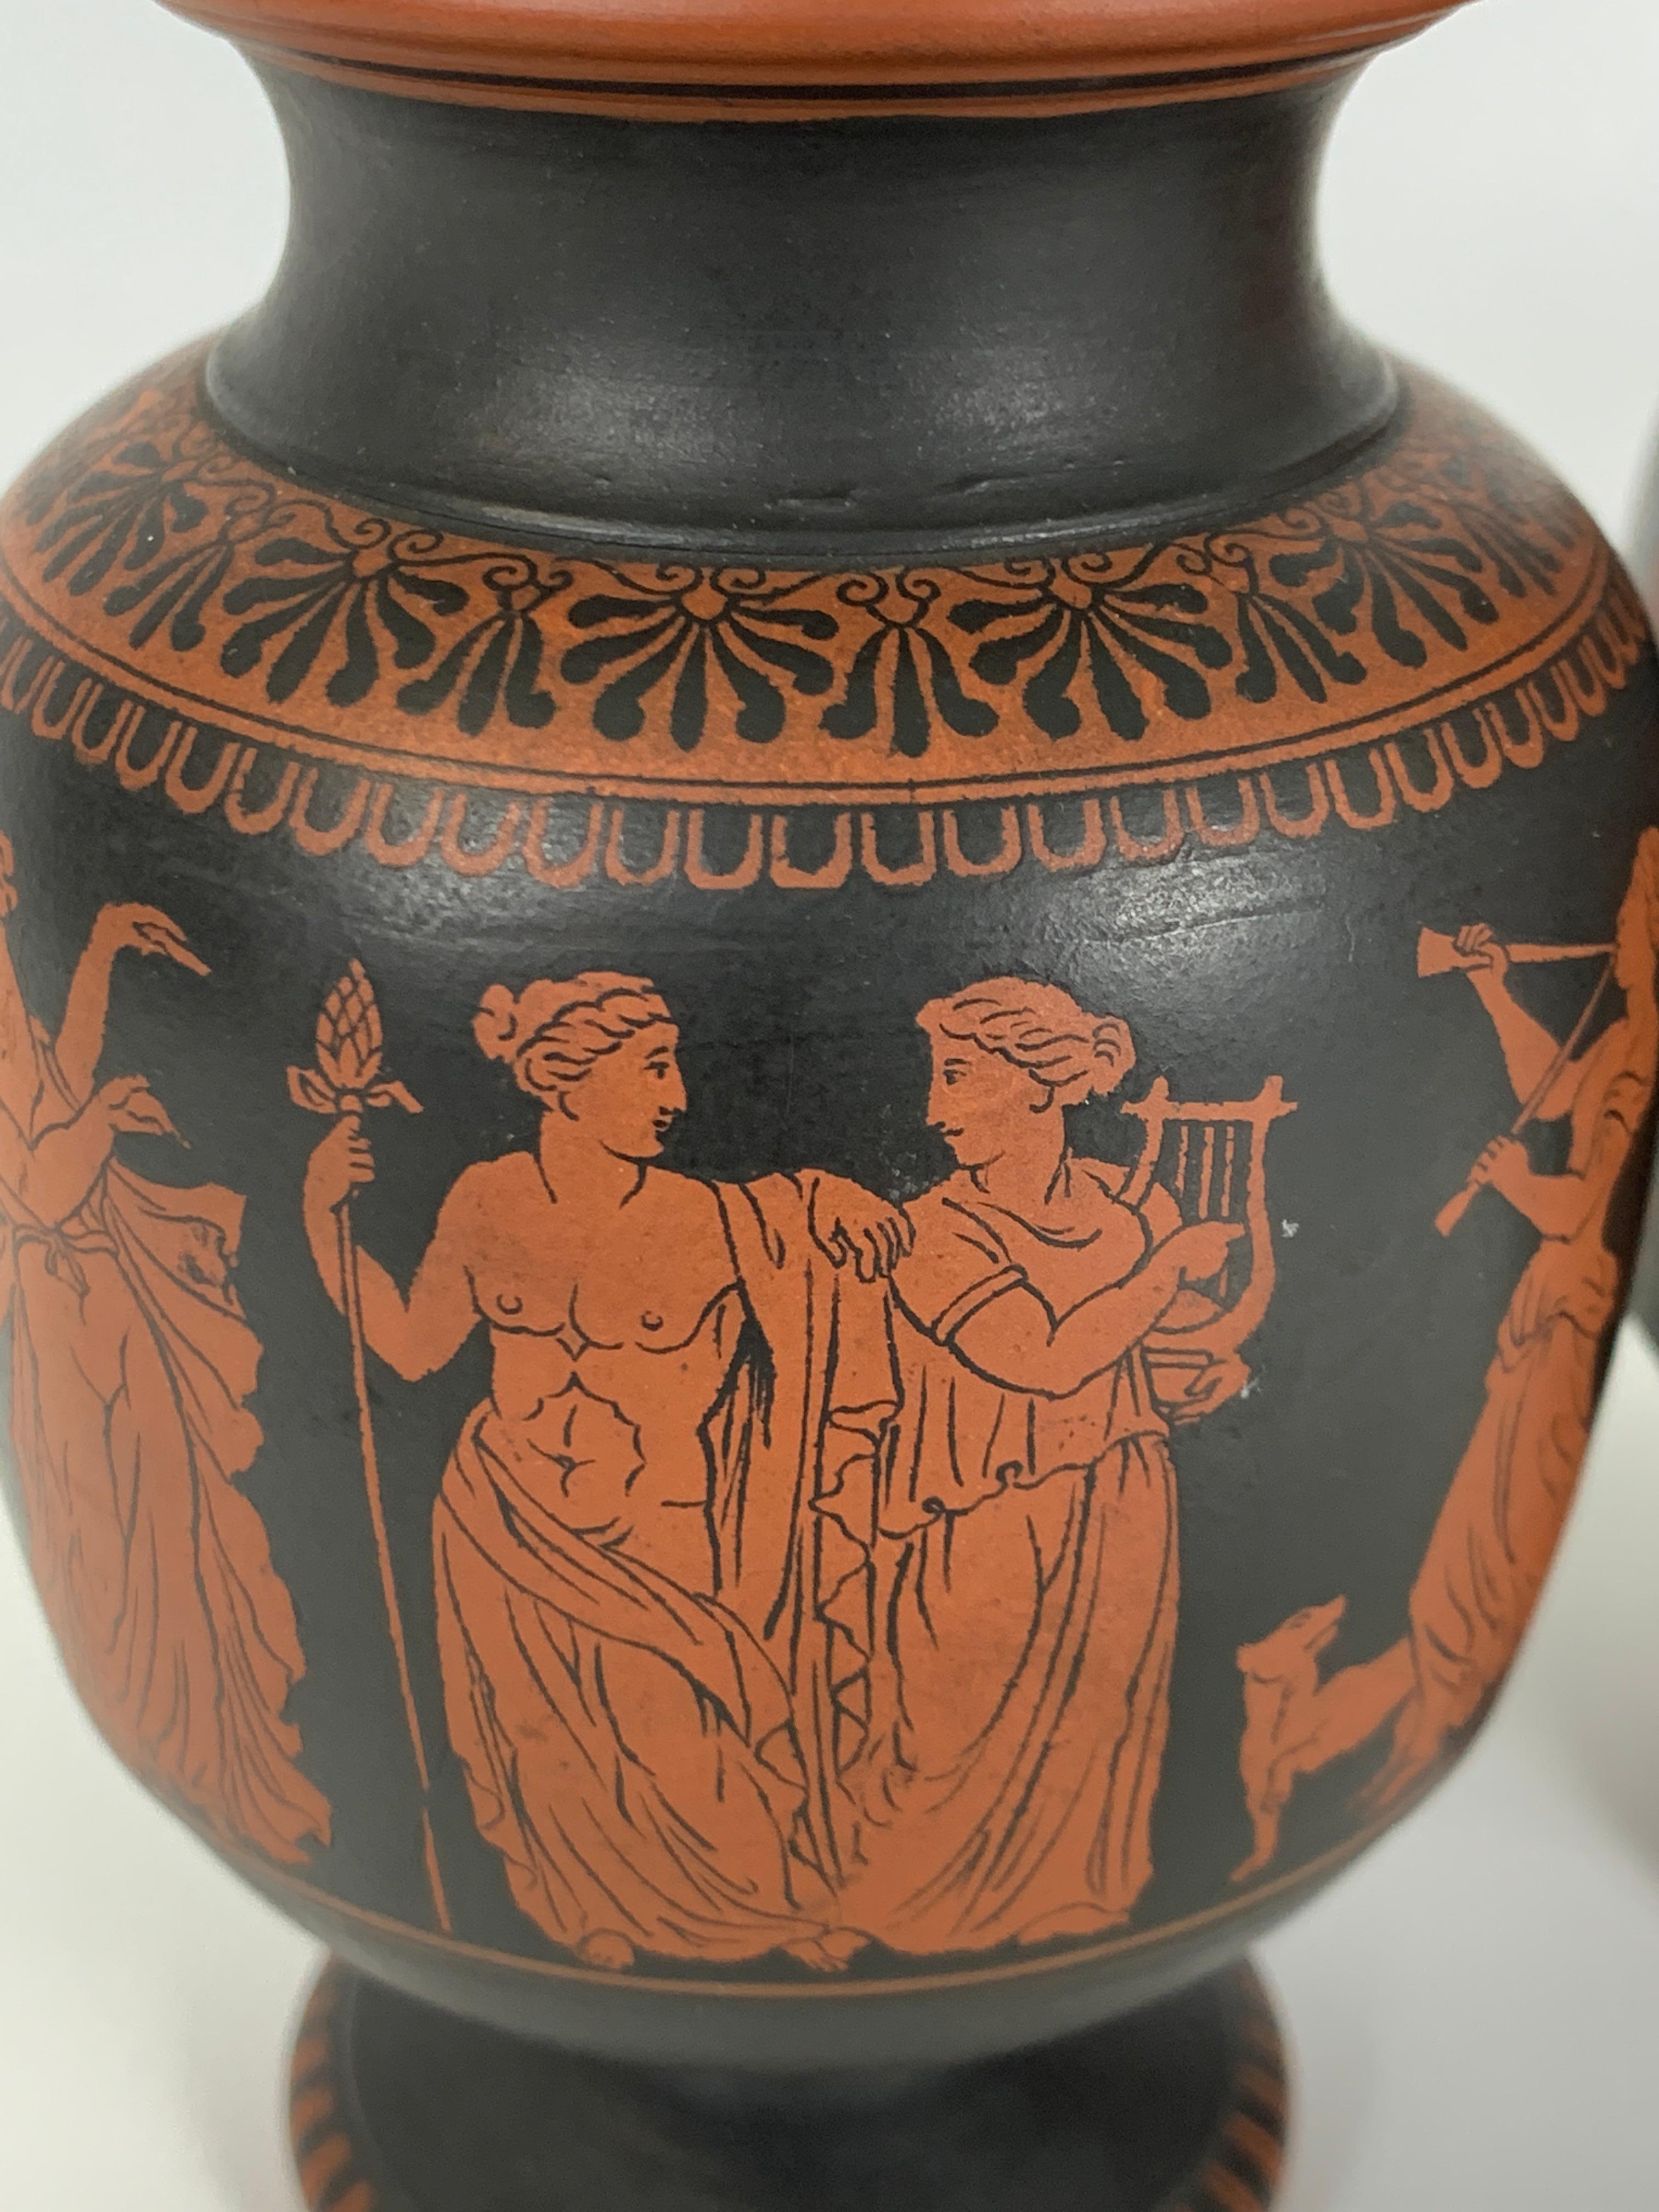 English Pair of Small Terracotta Vases showing Classical Figures Made in England